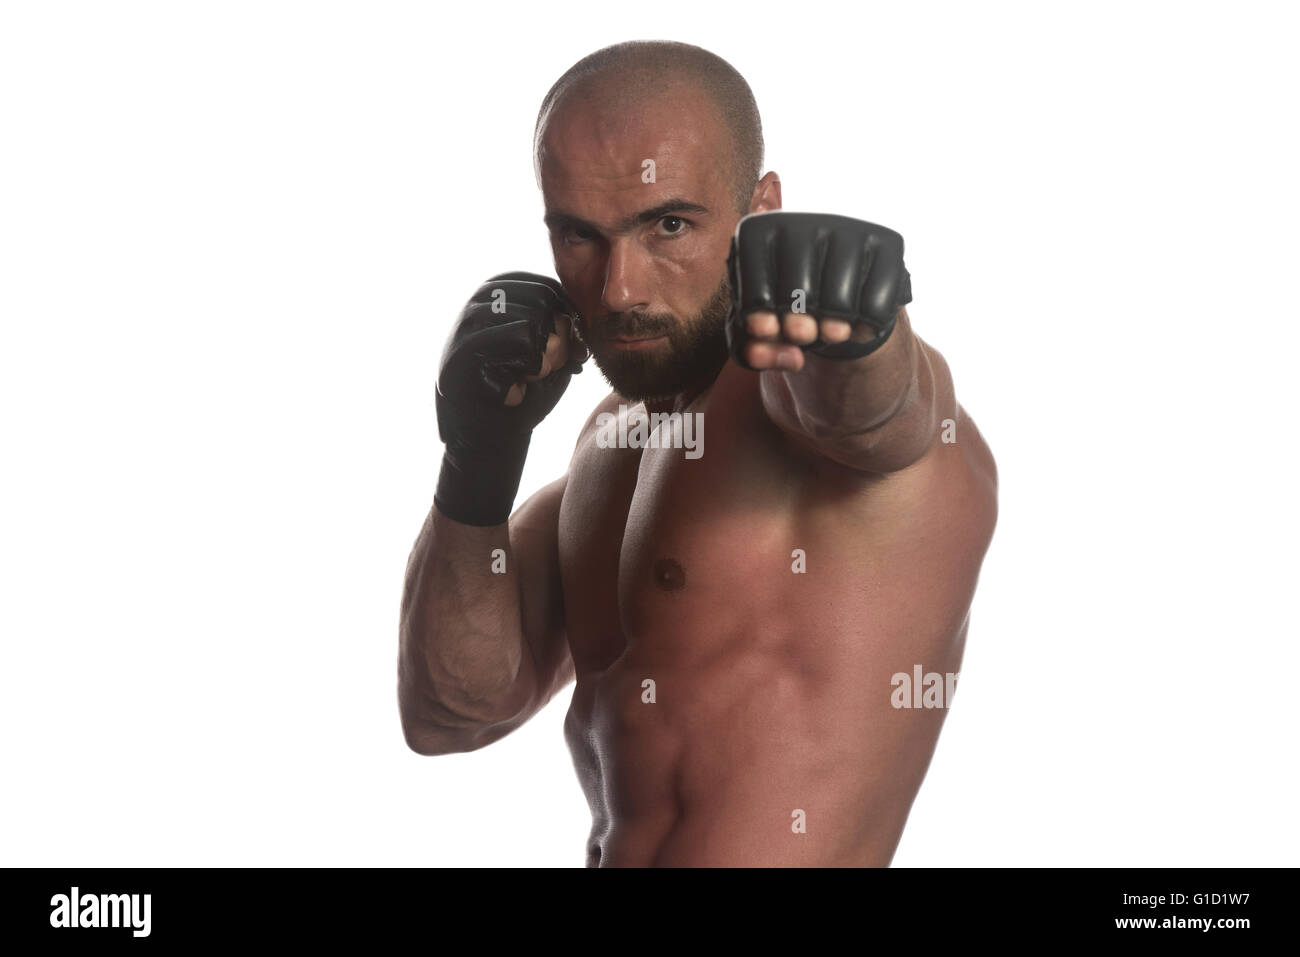 Muscular Sports Guy Boxing Workout Over White Background Isolated Stock Photo